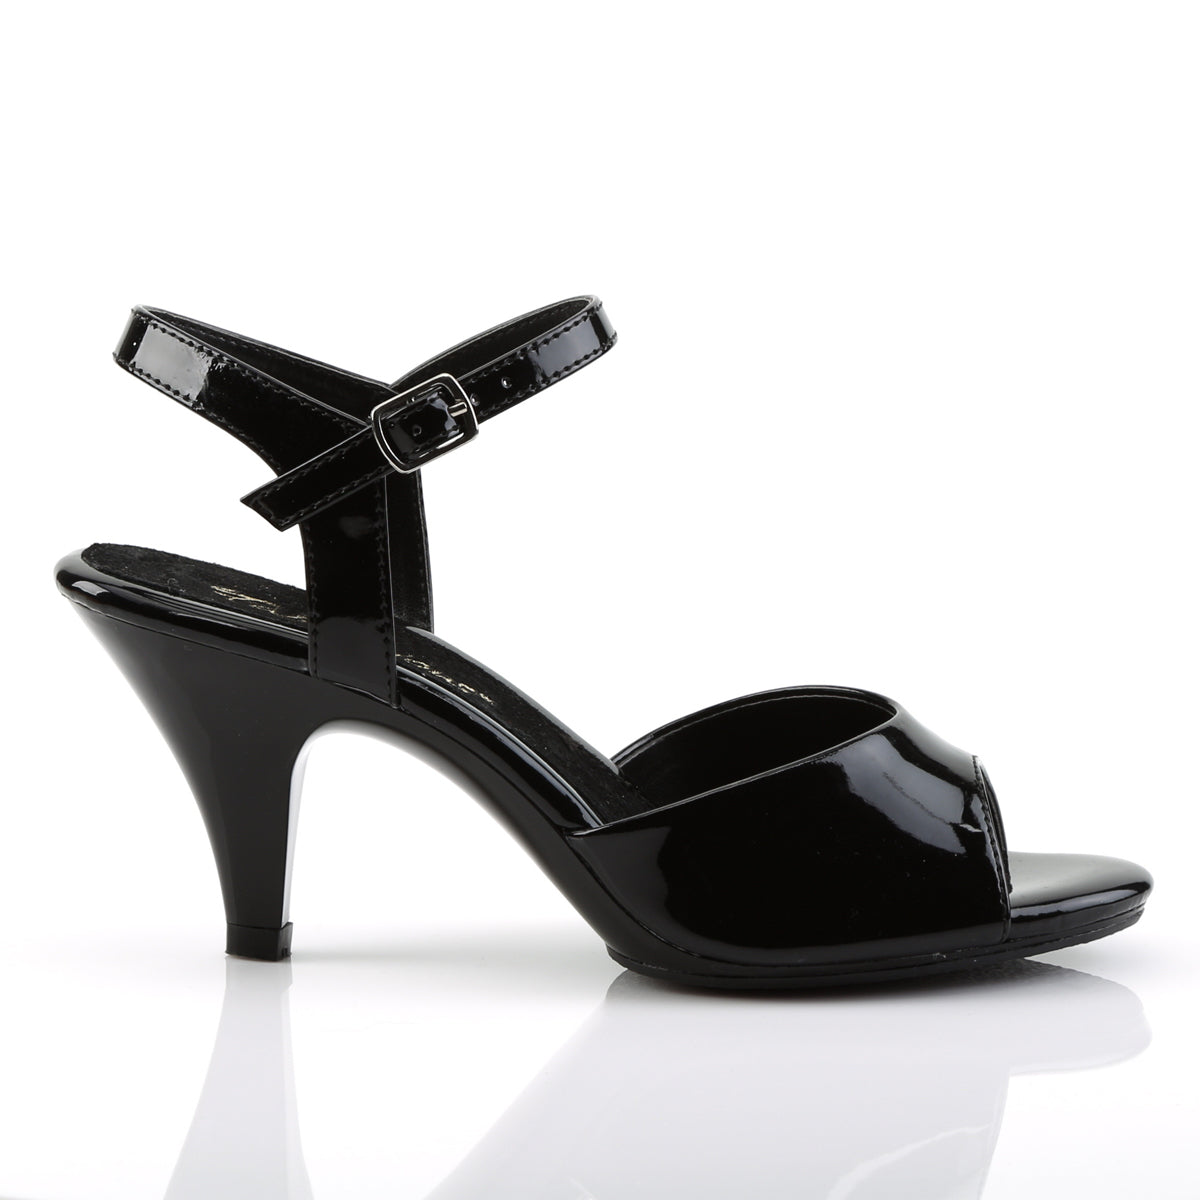 BELLE-309 Fabulicious 3 Inch Heel Black Sexy Shoes-Fabulicious- Sexy Shoes Fetish Heels